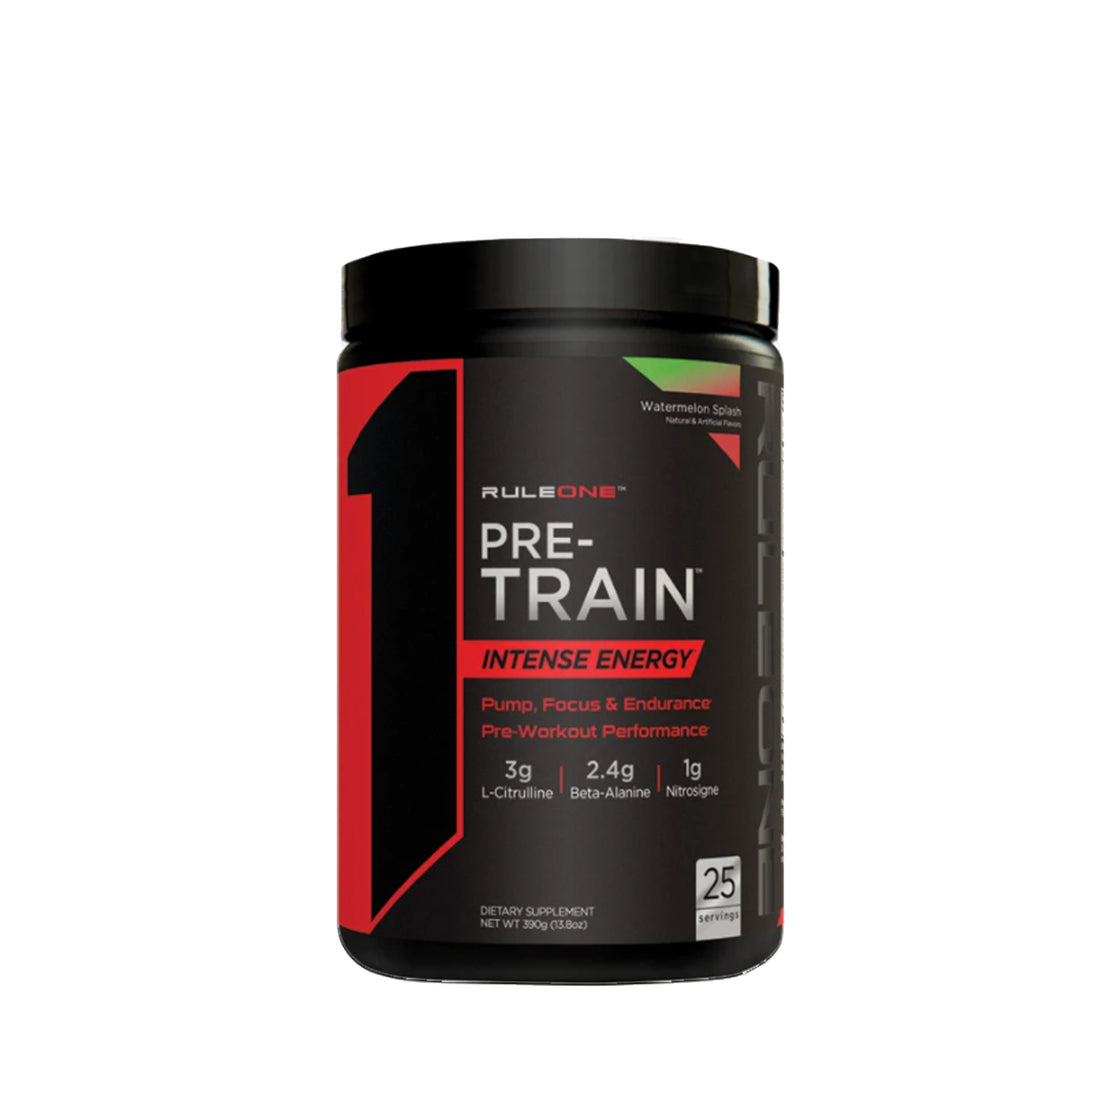  Train Pre Workout for Push Pull Legs